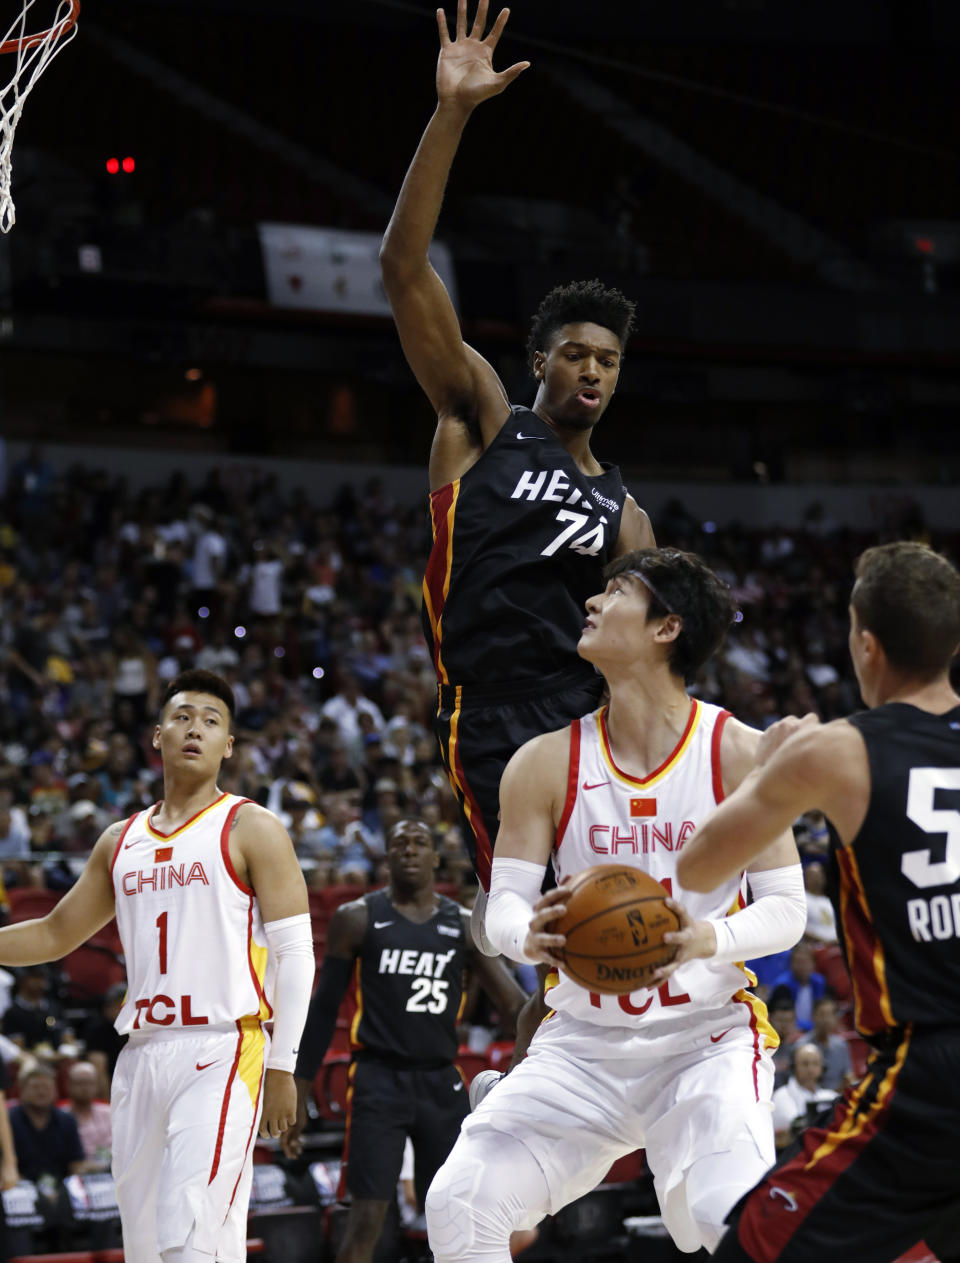 Miami Heat's Kyle Alexander (74) jumps to block a shot by China's Wang Zhelin (31) as China's Zhao Rui (1) watches during an NBA summer league basketball game Friday, July 5, 2019, in Las Vegas. (AP Photo/Steve Marcus)